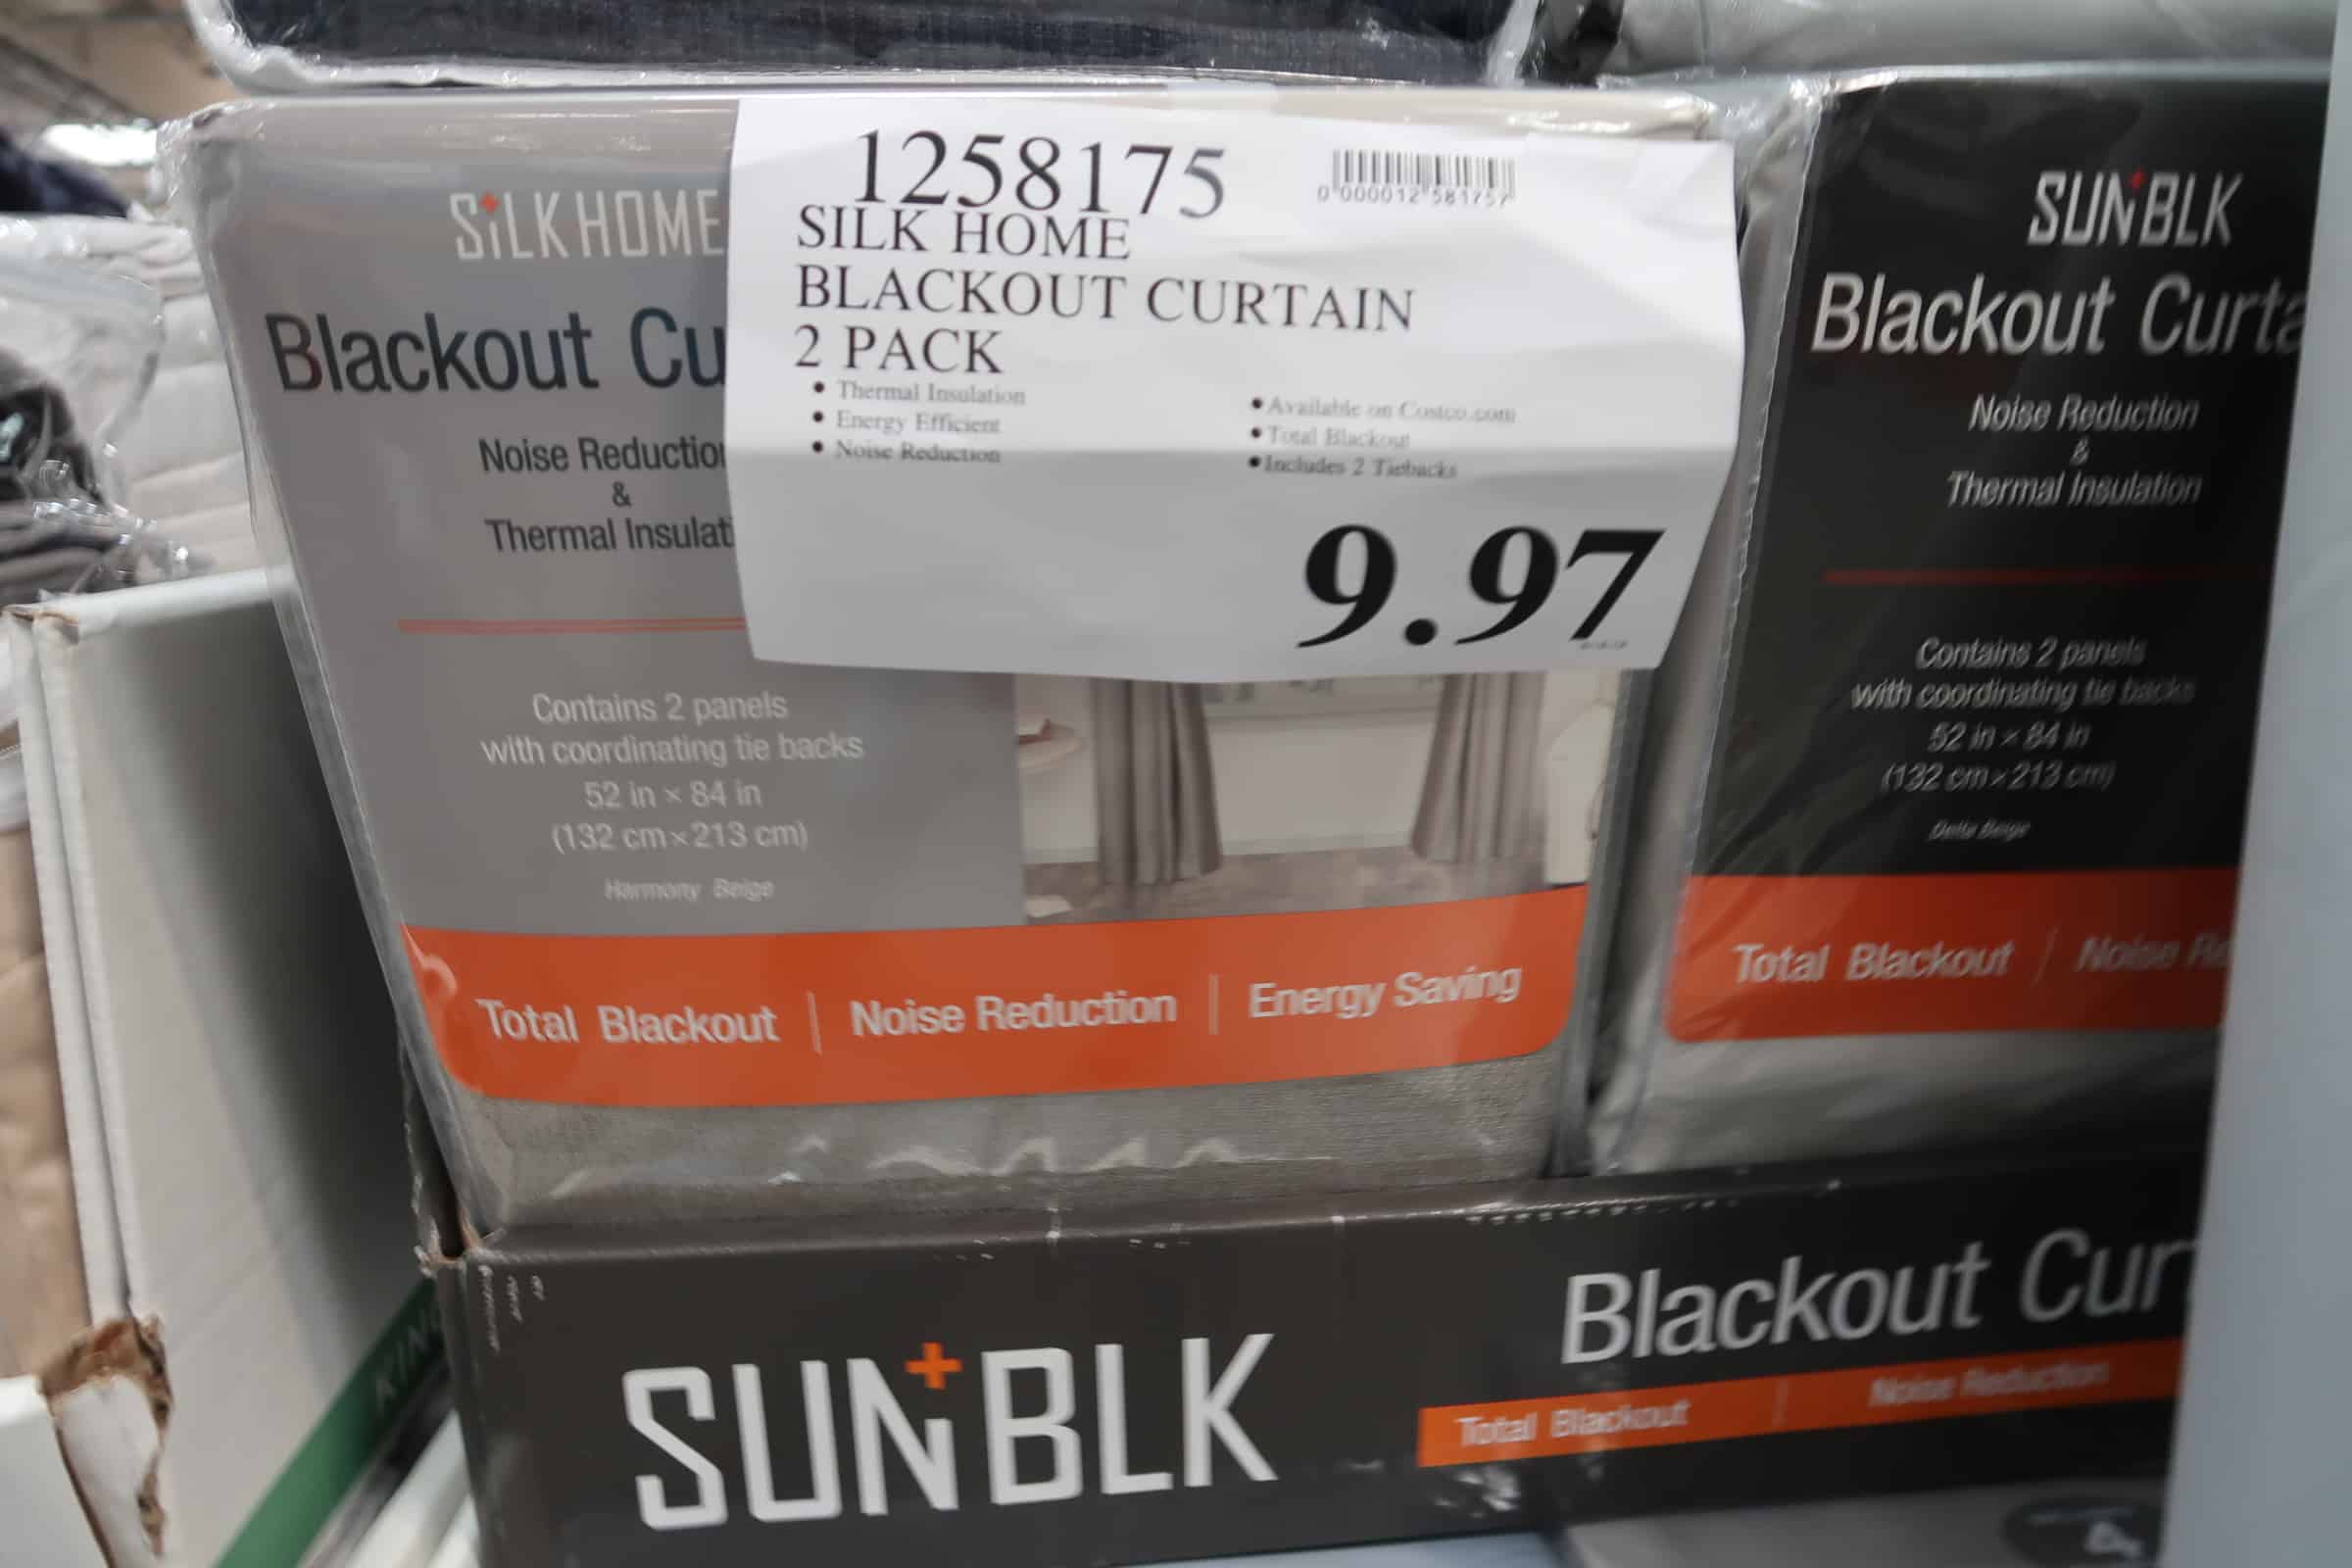 2 Pk. BlackOut Curtains $9.97 at Costco - My Wholesale Life